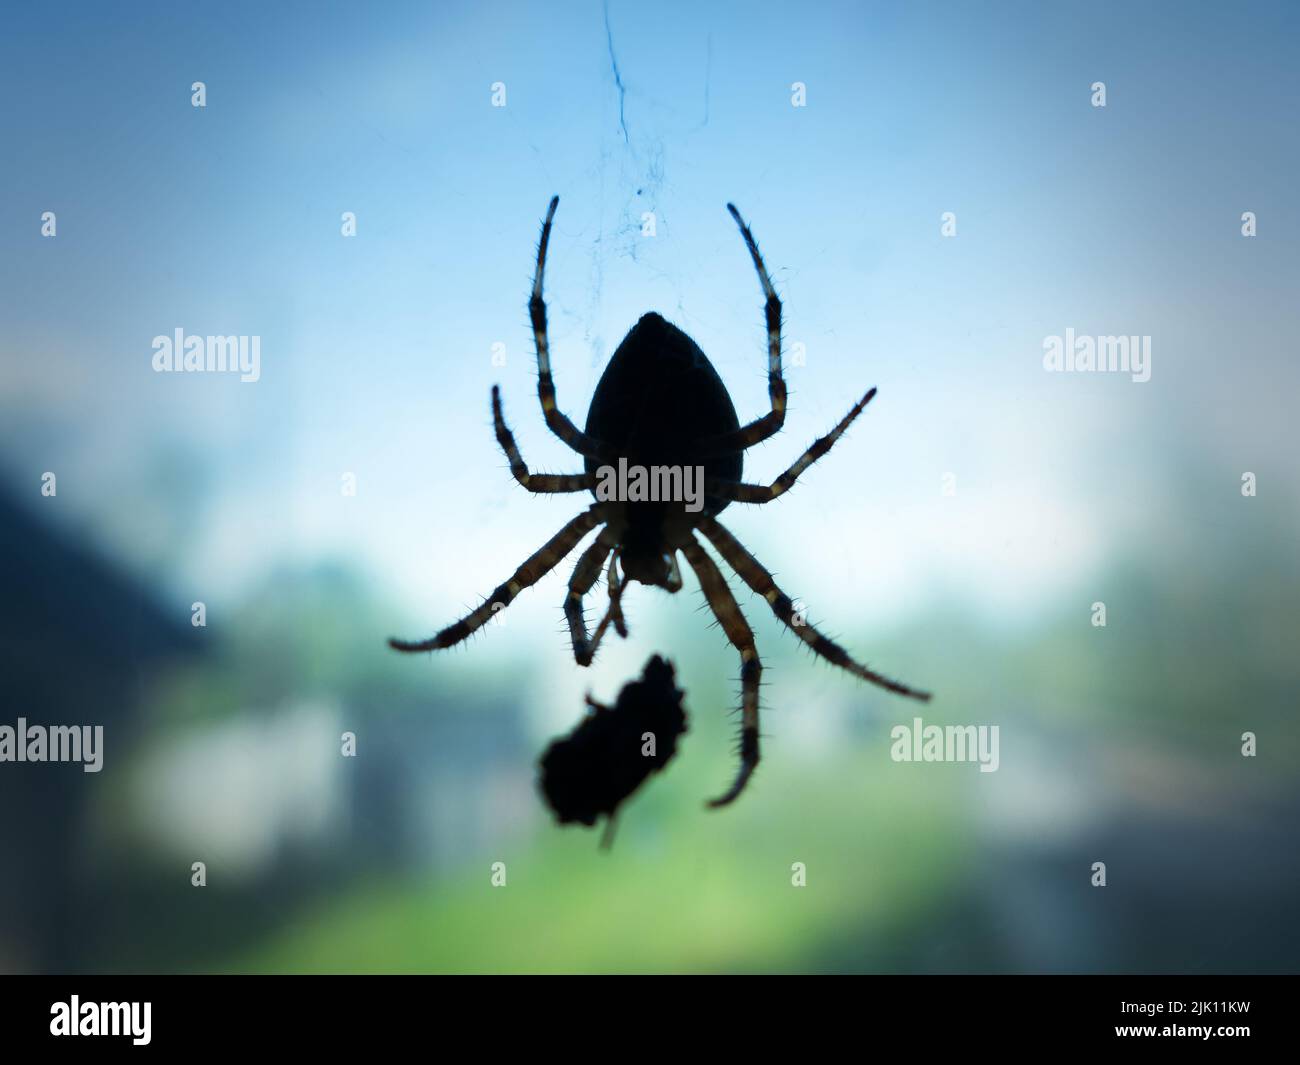 Eating a fly by a Garden spider (Araneus); fly is entangled in a web. On the background of a window with a blurry rustic background Stock Photo